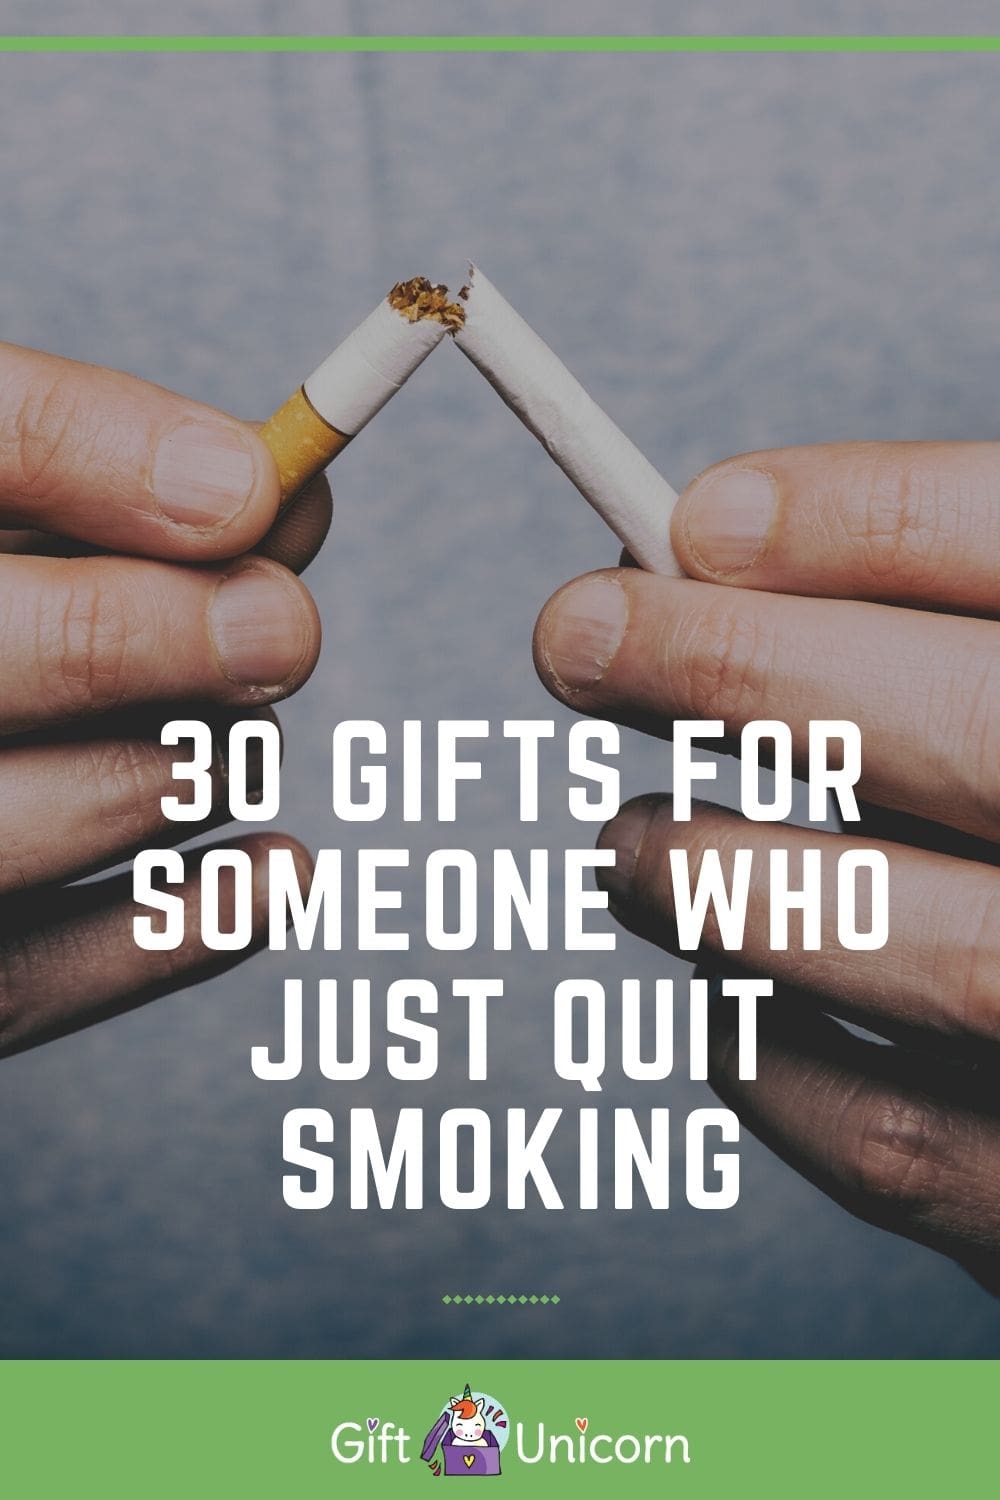 30 gifts for someone who just quit smoking pin image